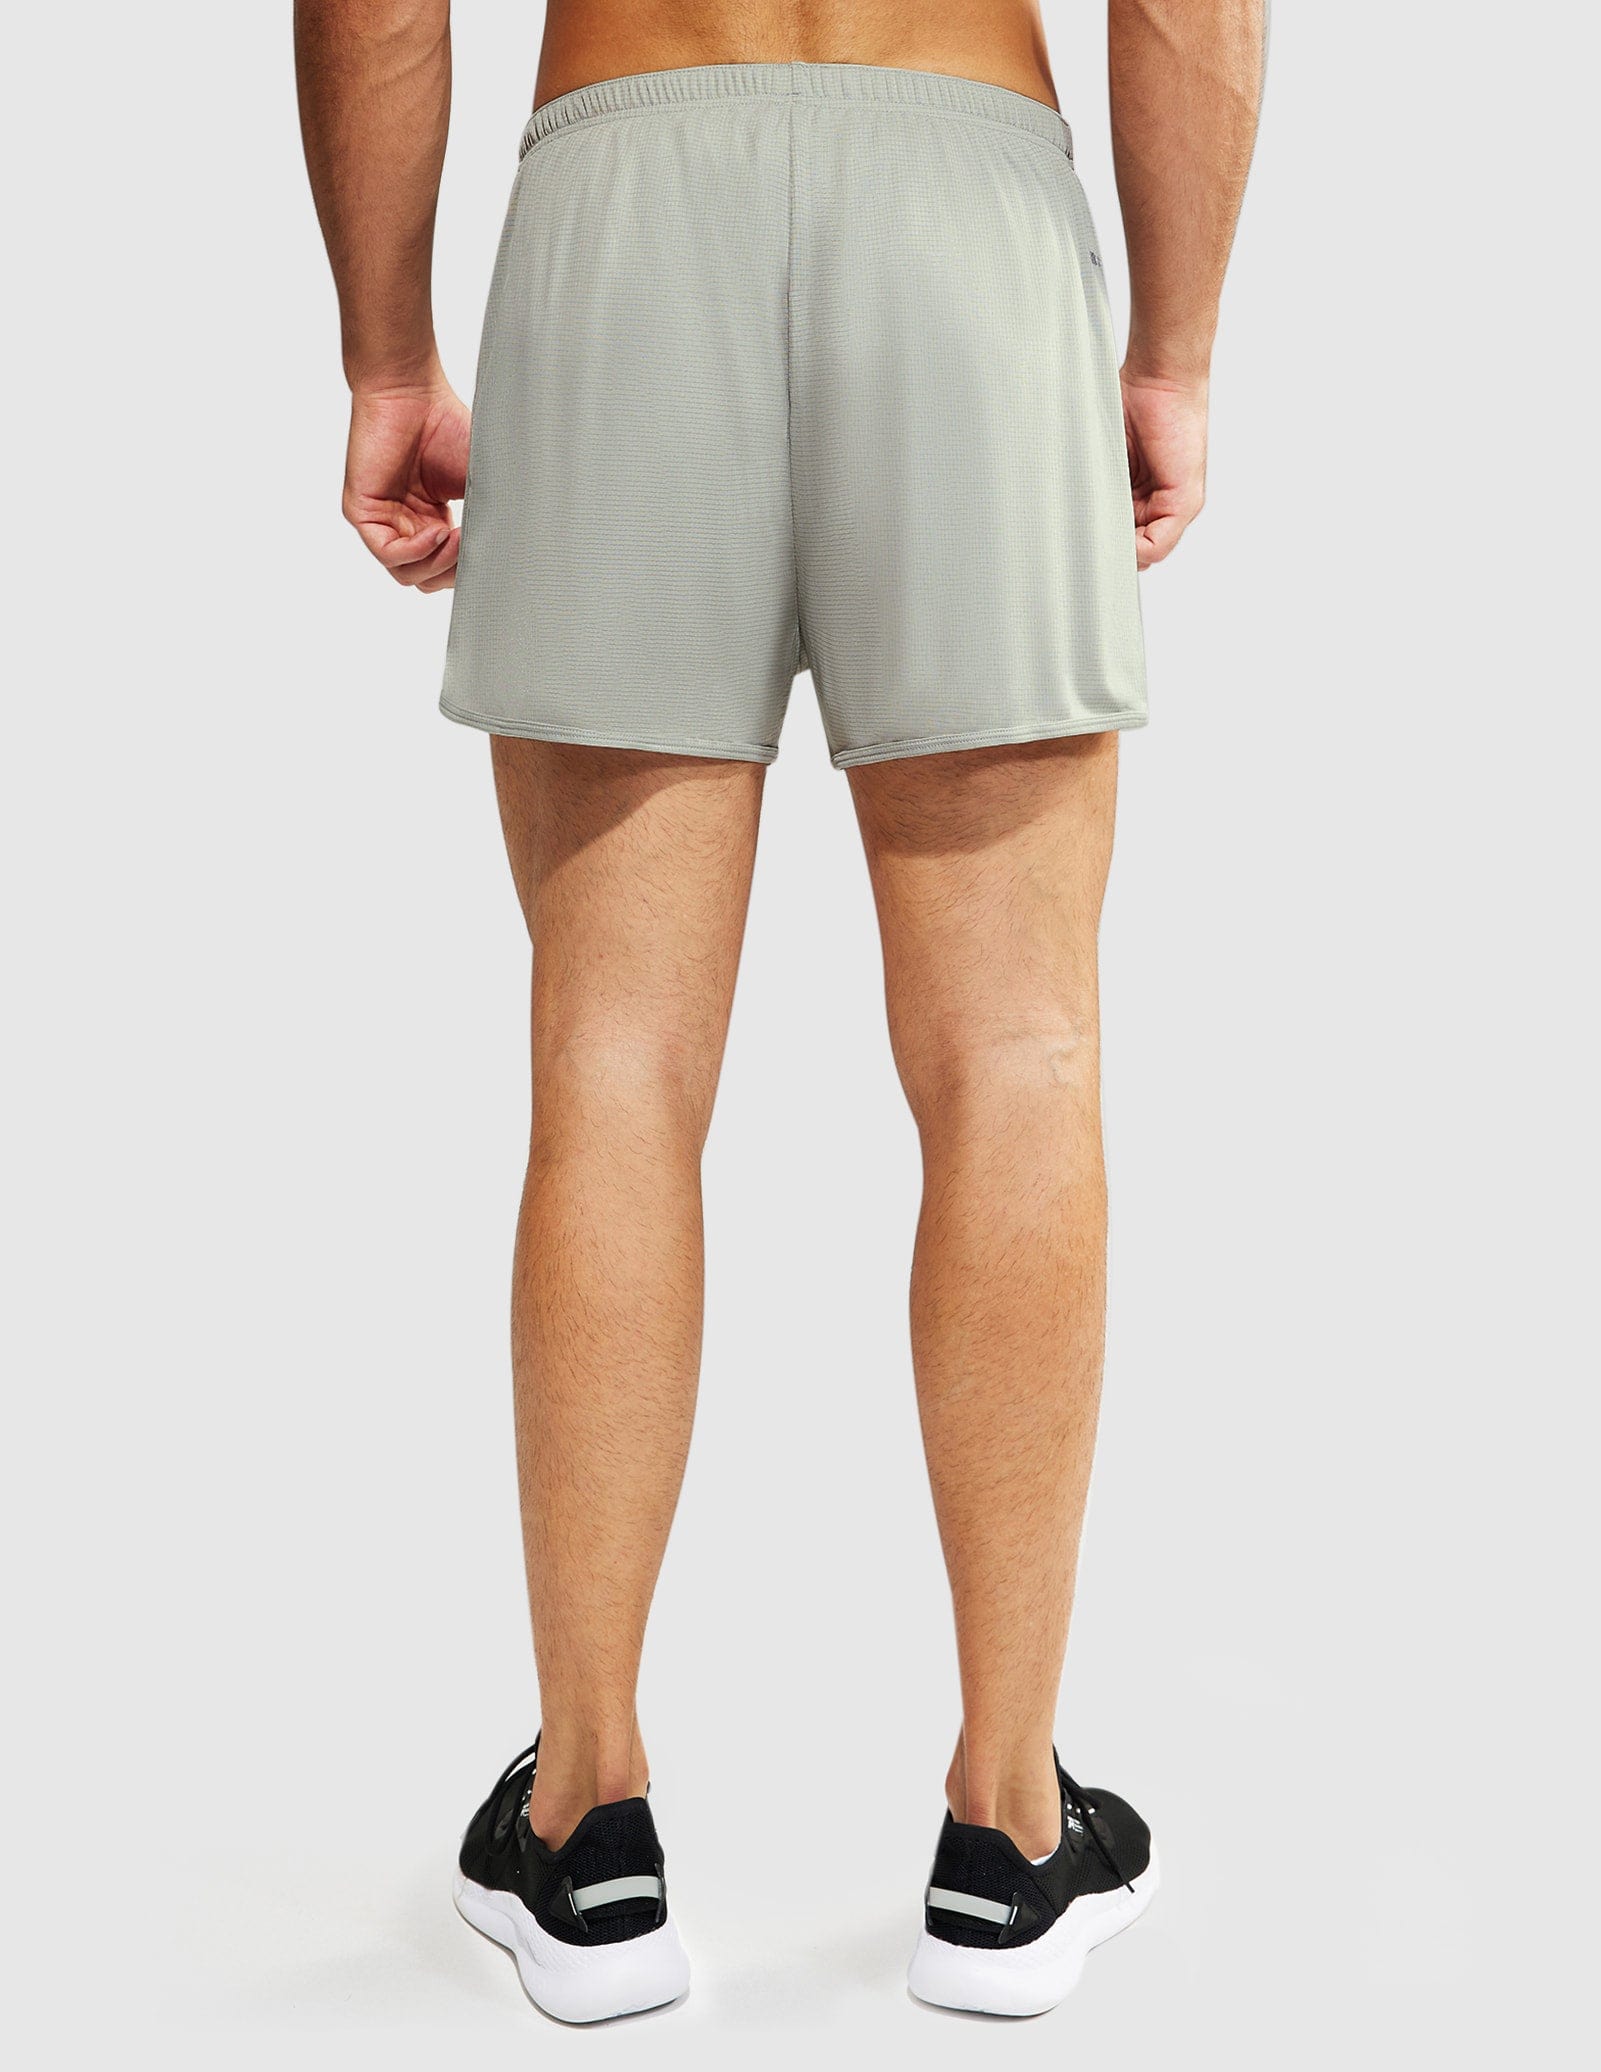 Men's 3-Inch Quick Dry Running Shorts with Liner Men's Shorts MIER